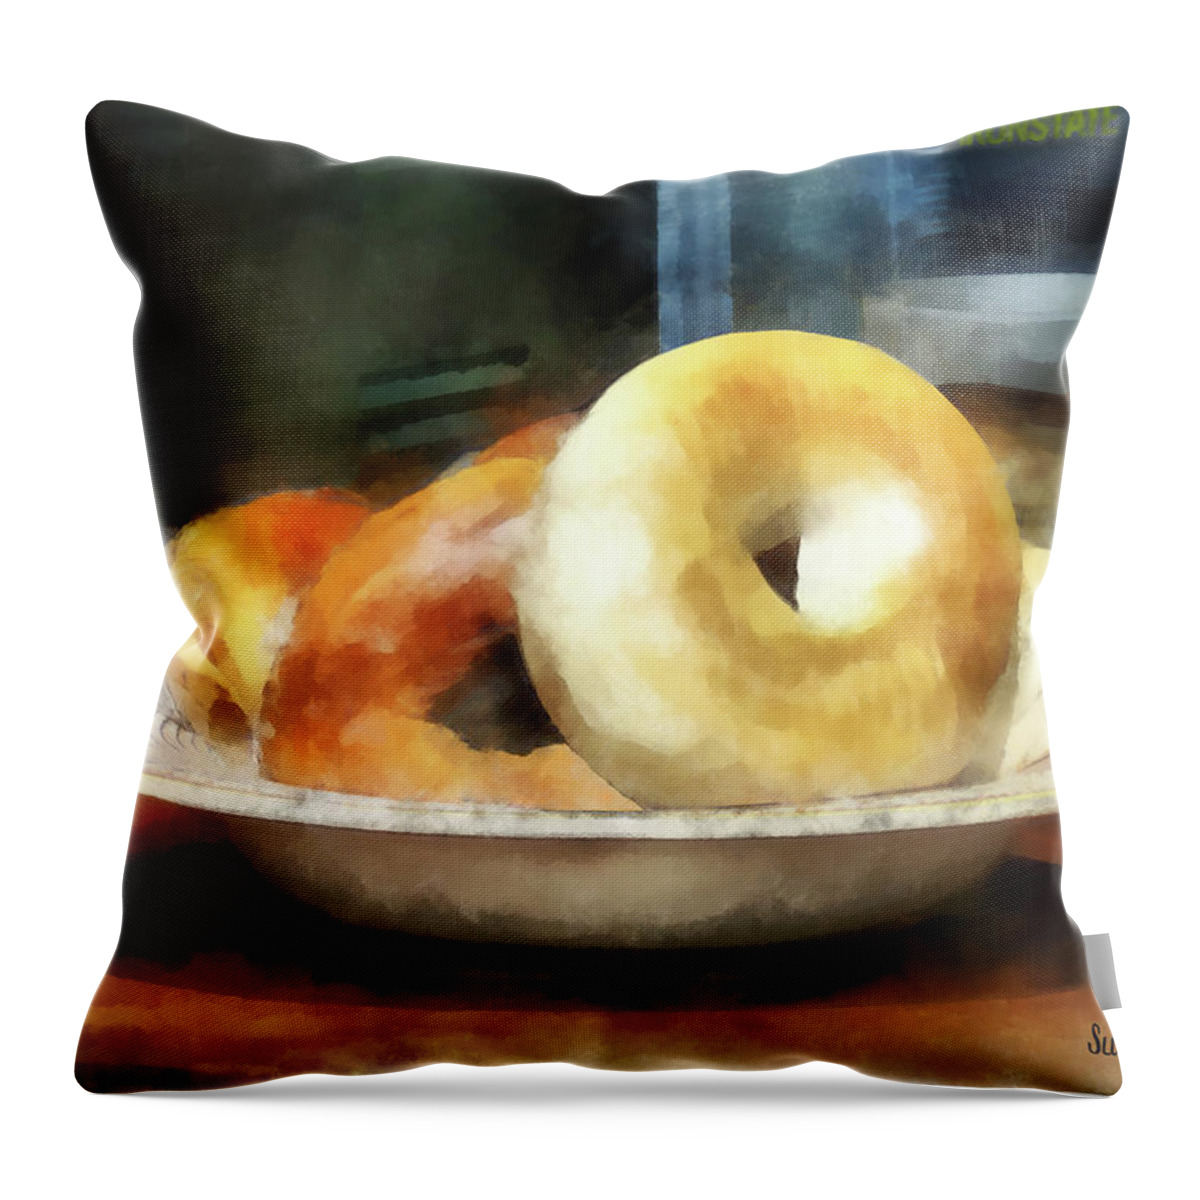 Bagels Throw Pillow featuring the photograph Food - Bagels for Sale by Susan Savad